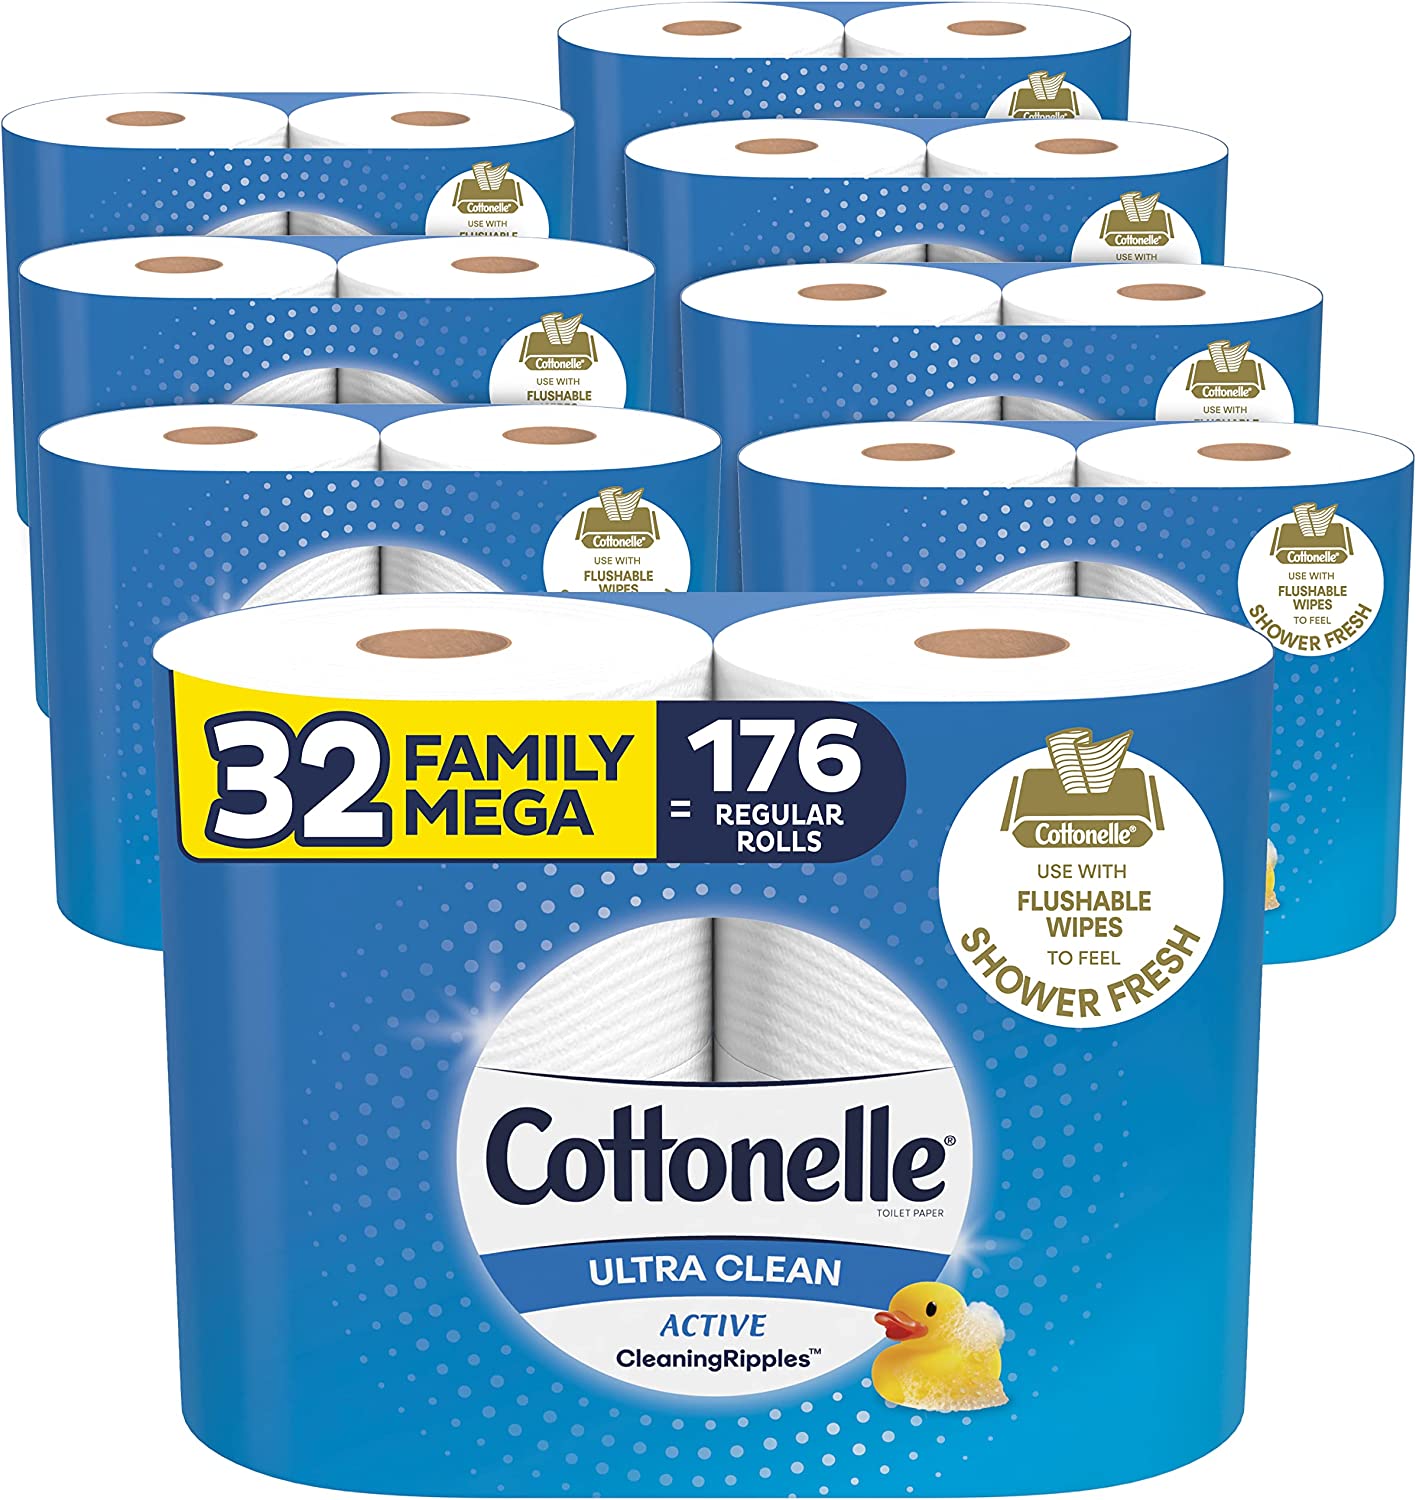 32-Count Cottonelle Ultra Clean Family Mega Rolls Toilet Paper $26.09 w/ S&S + Free Shipping w/ Prime or on orders over $25